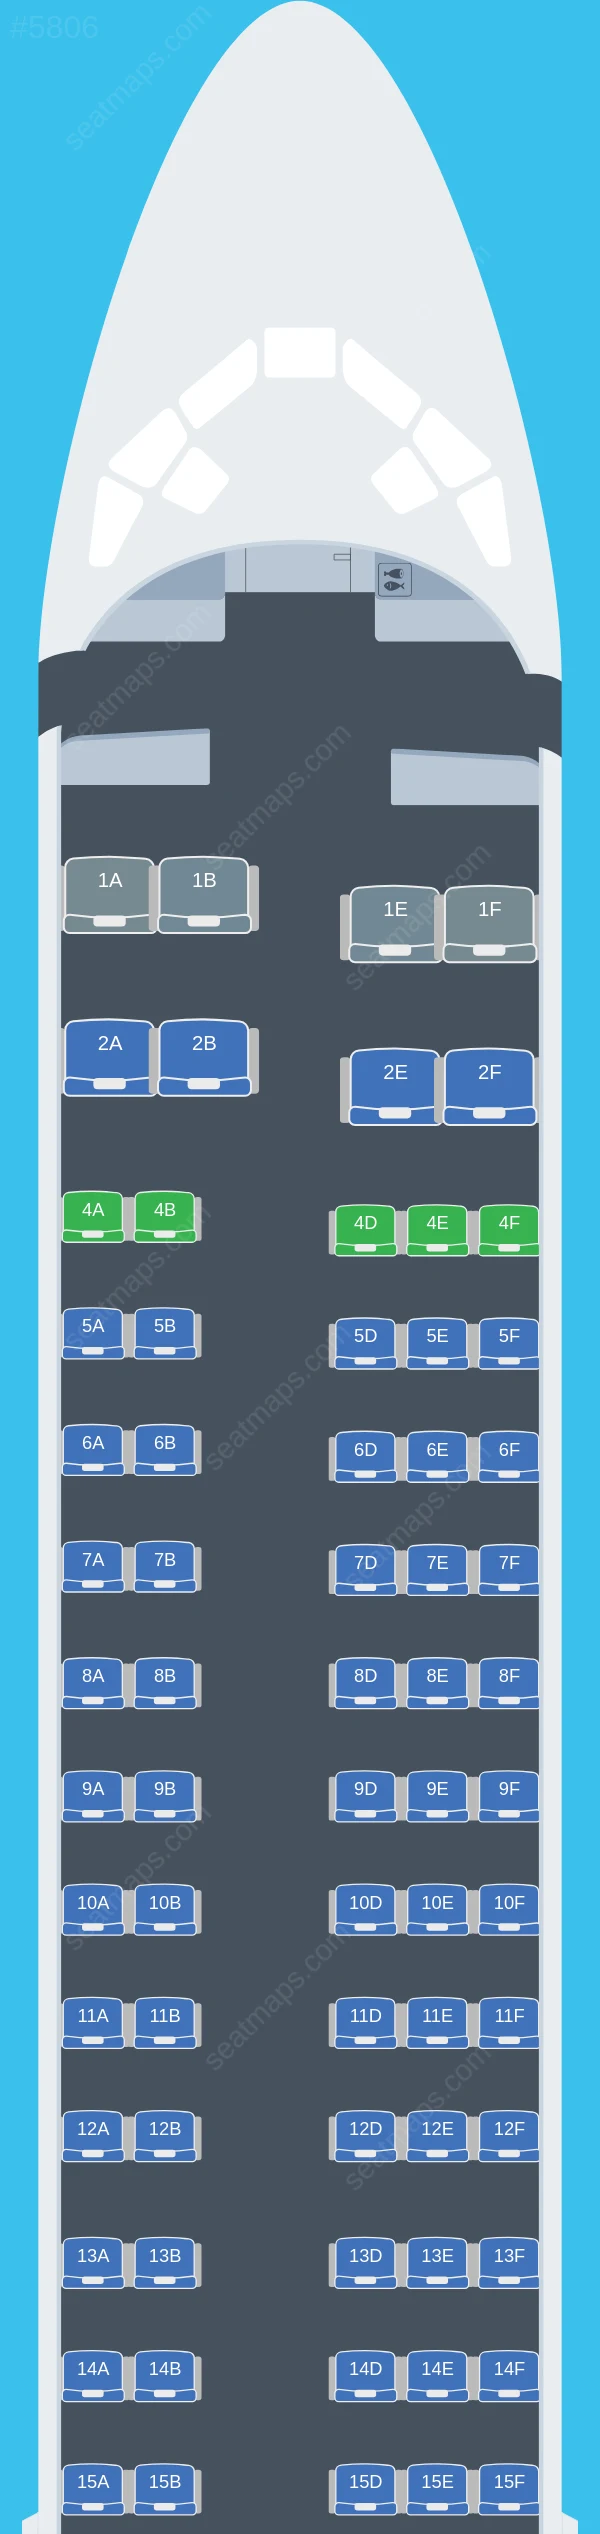 Hawaiian Airlines Boeing 717-200 seatmap preview